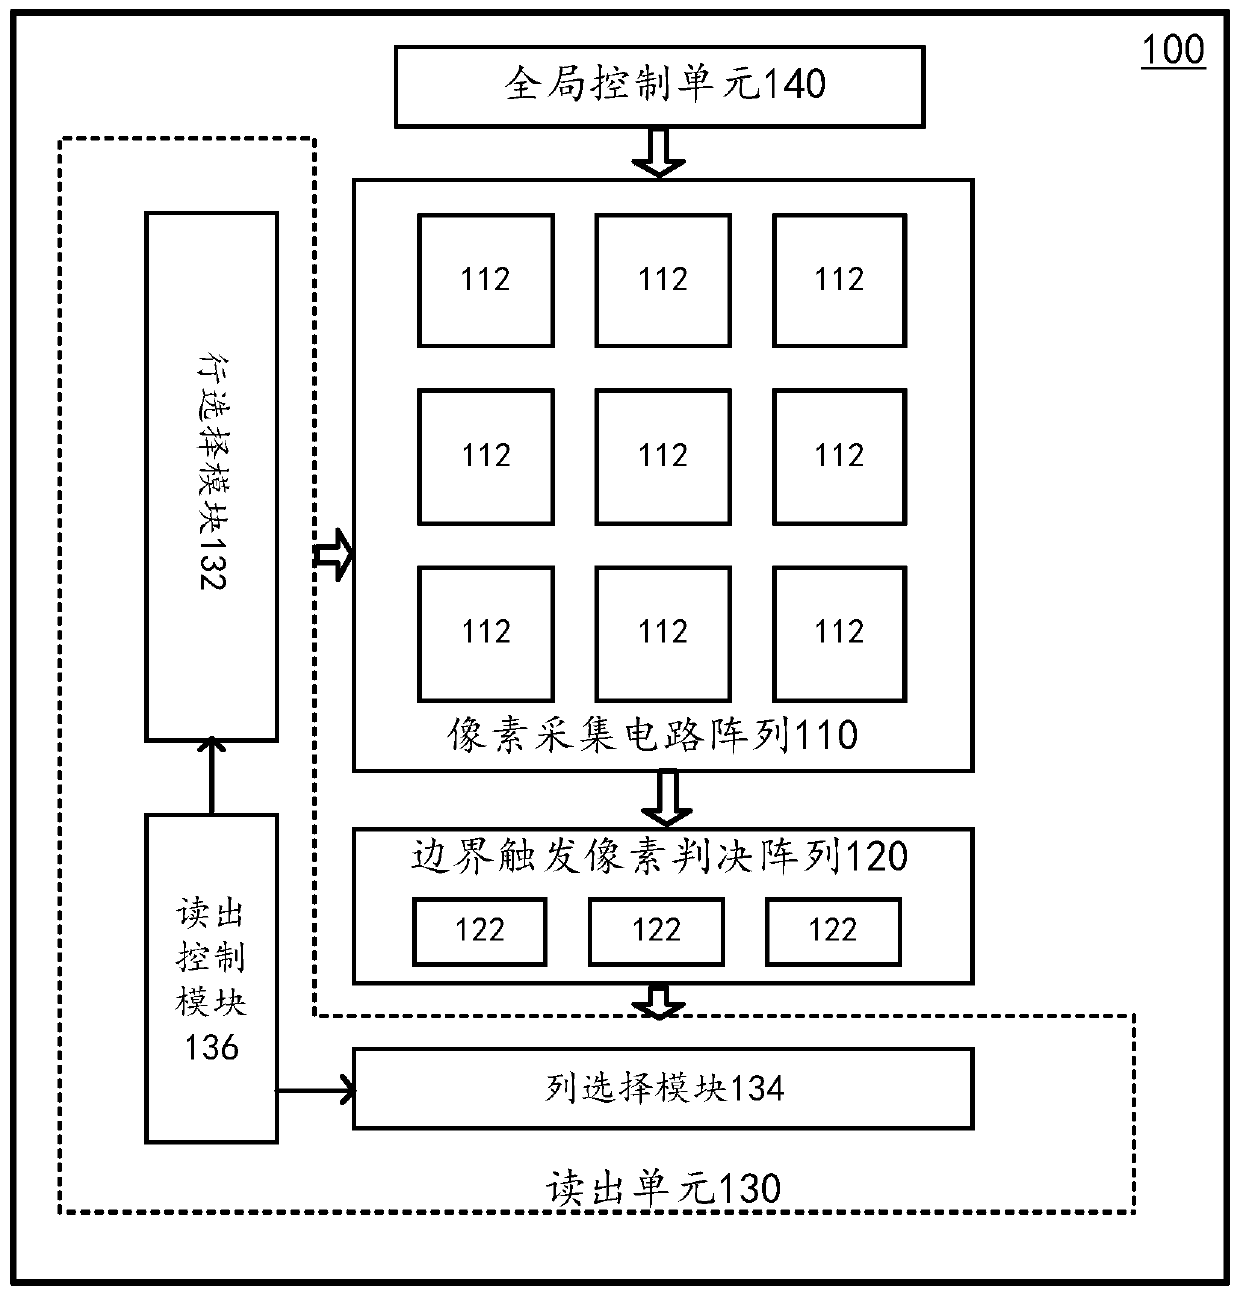 Image sensor and image acquisition system